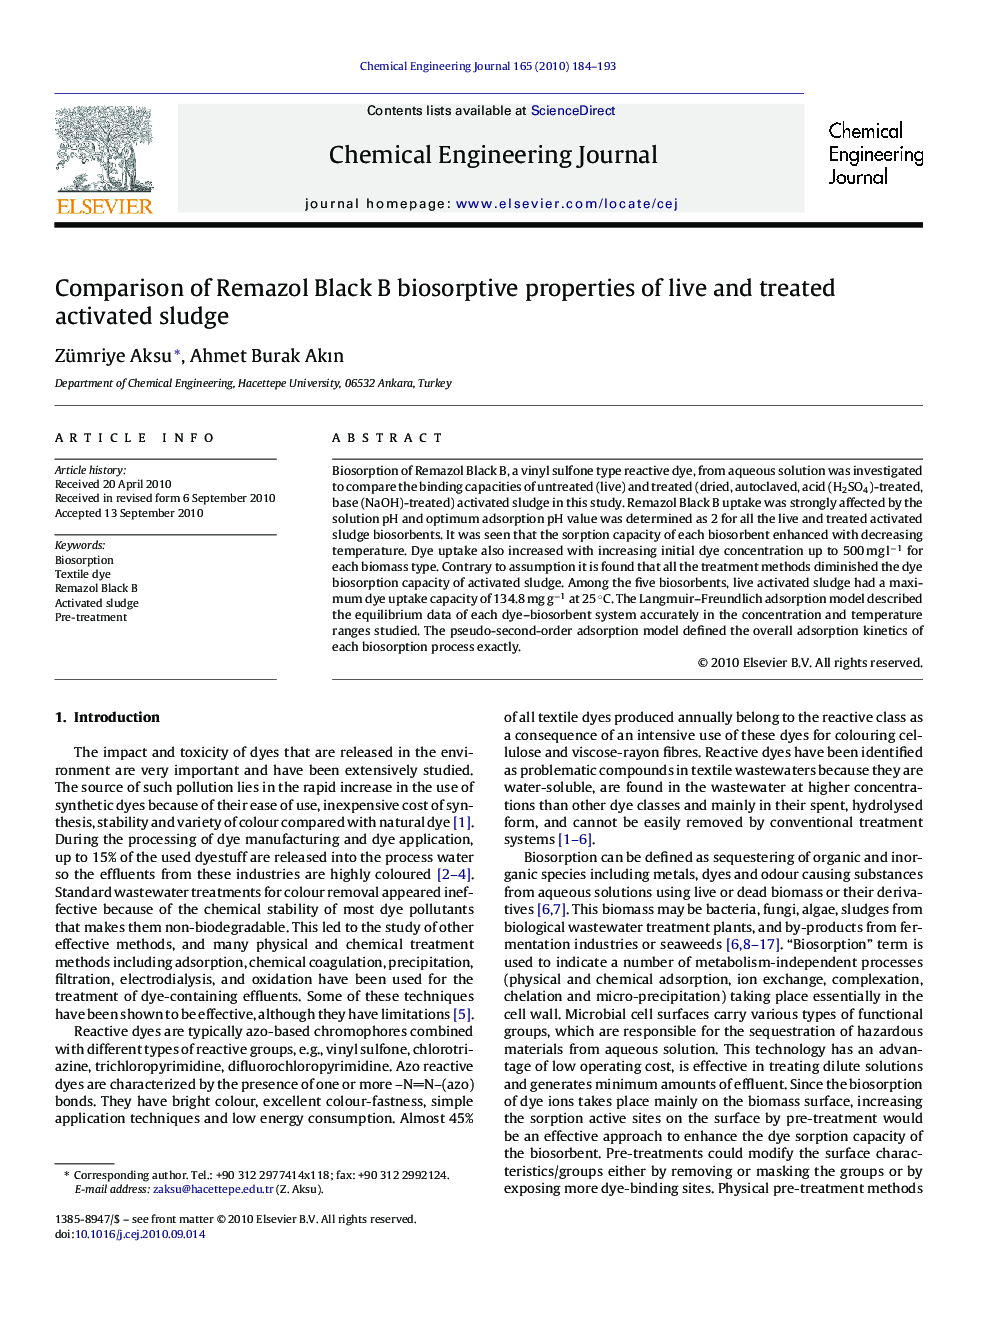 Comparison of Remazol Black B biosorptive properties of live and treated activated sludge